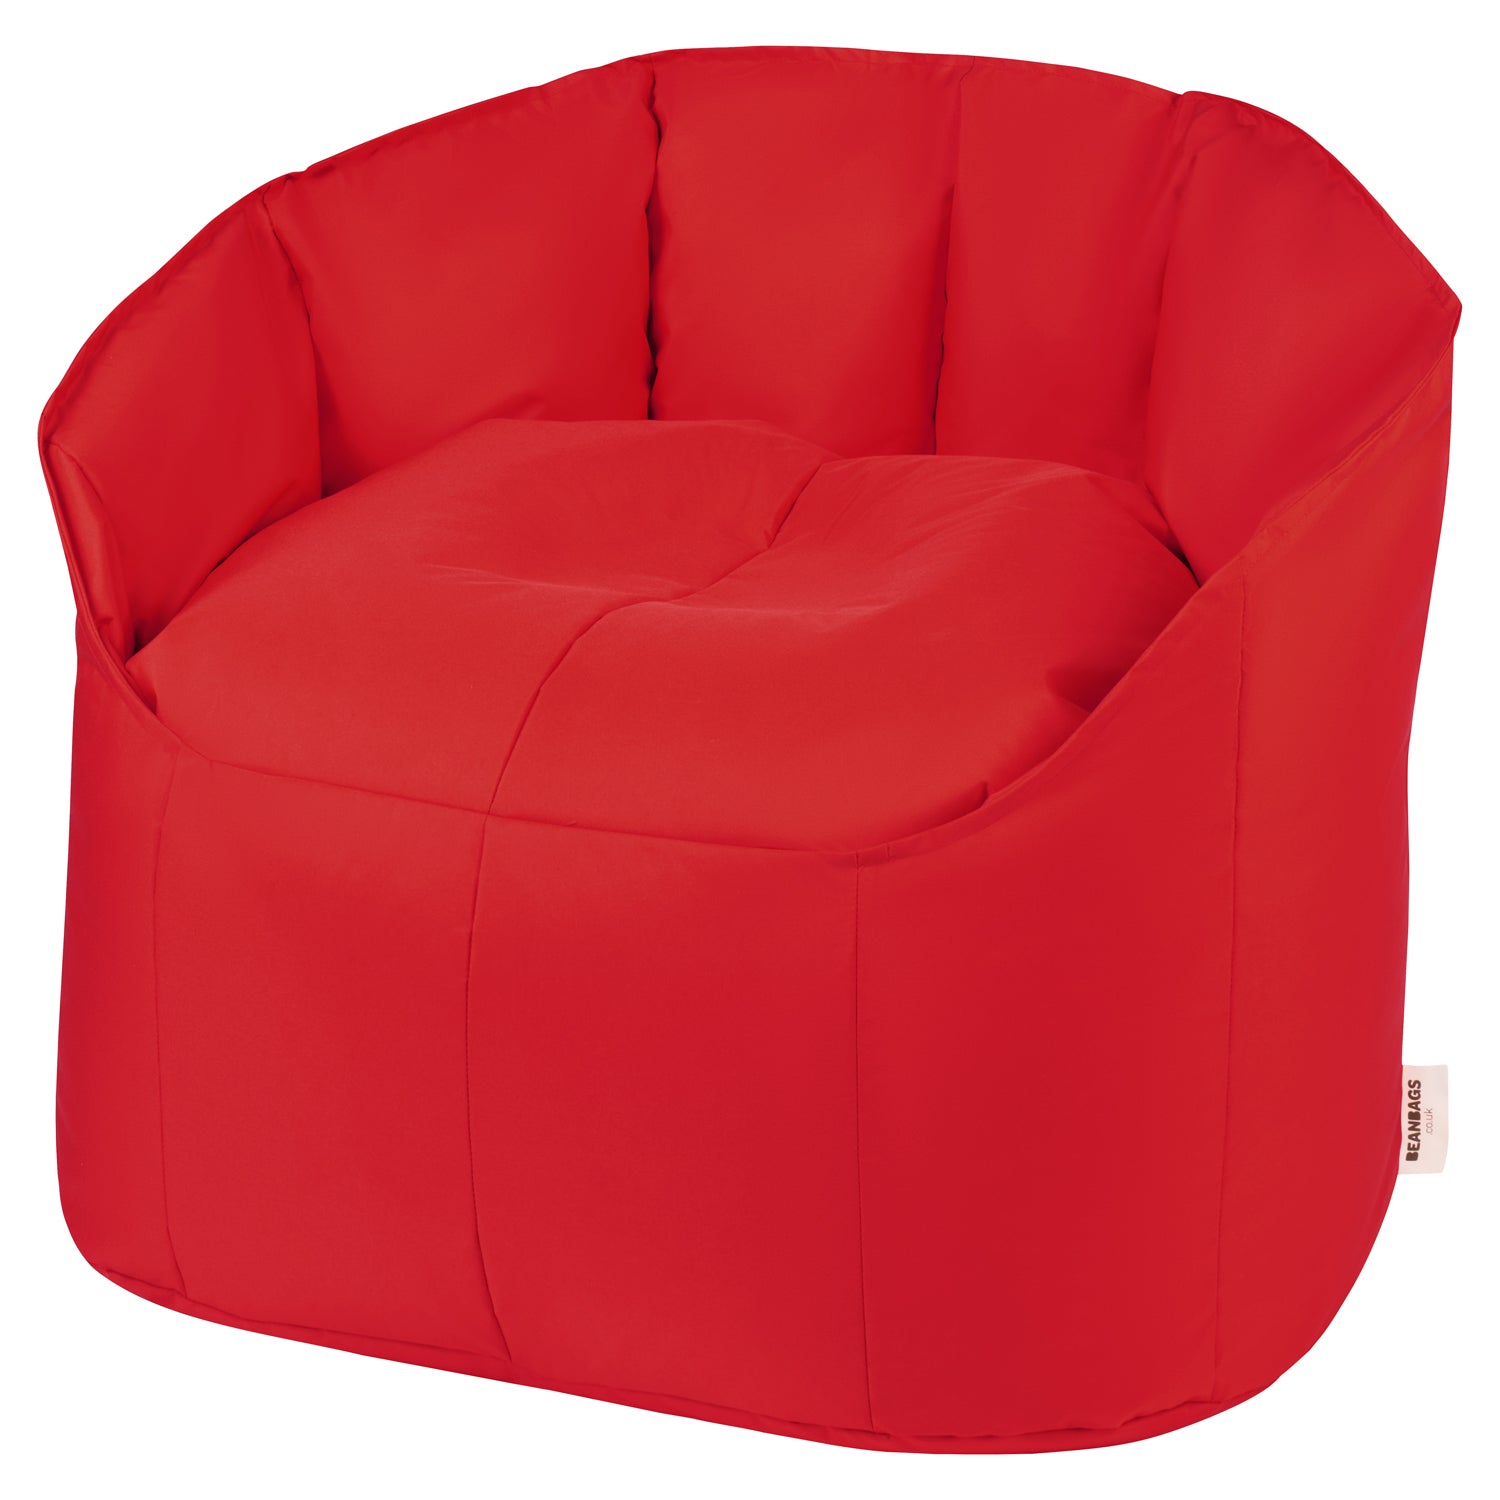 Kids Accent Chair Beanbag - Red - Polyester Fabric